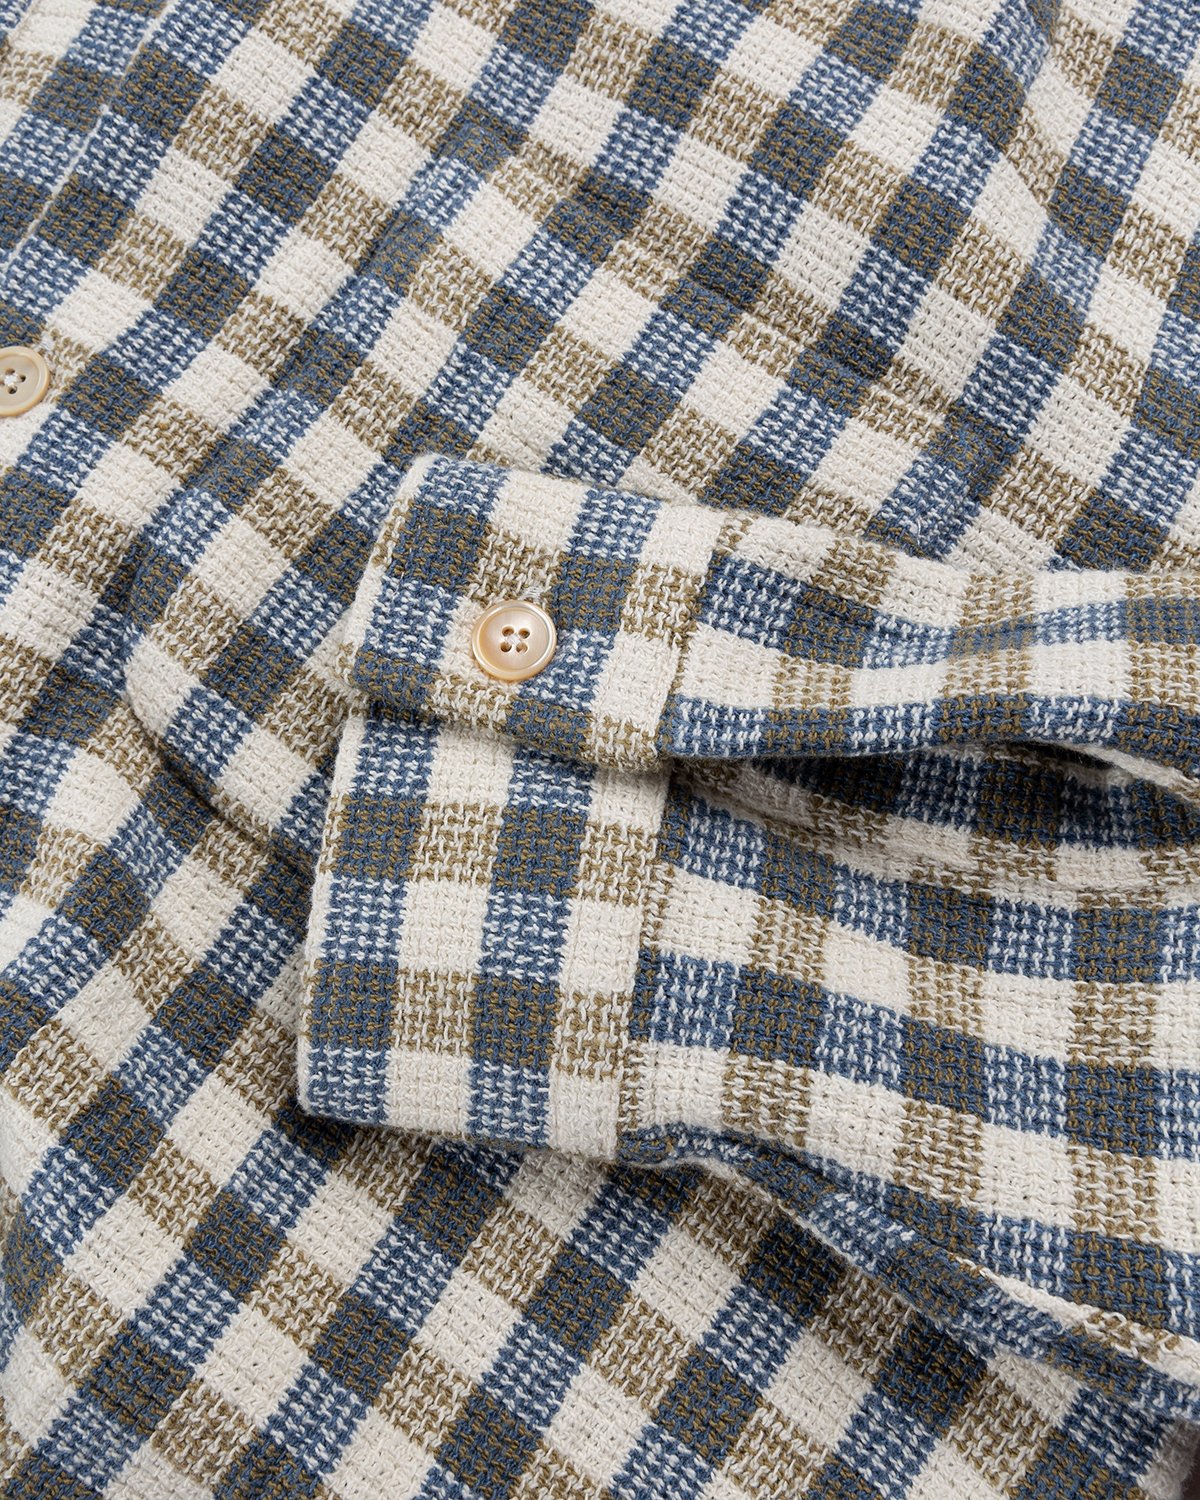 Our Legacy - Heusen Shirt Light Blue/Olive Summer Check - Clothing - Blue - Image 5